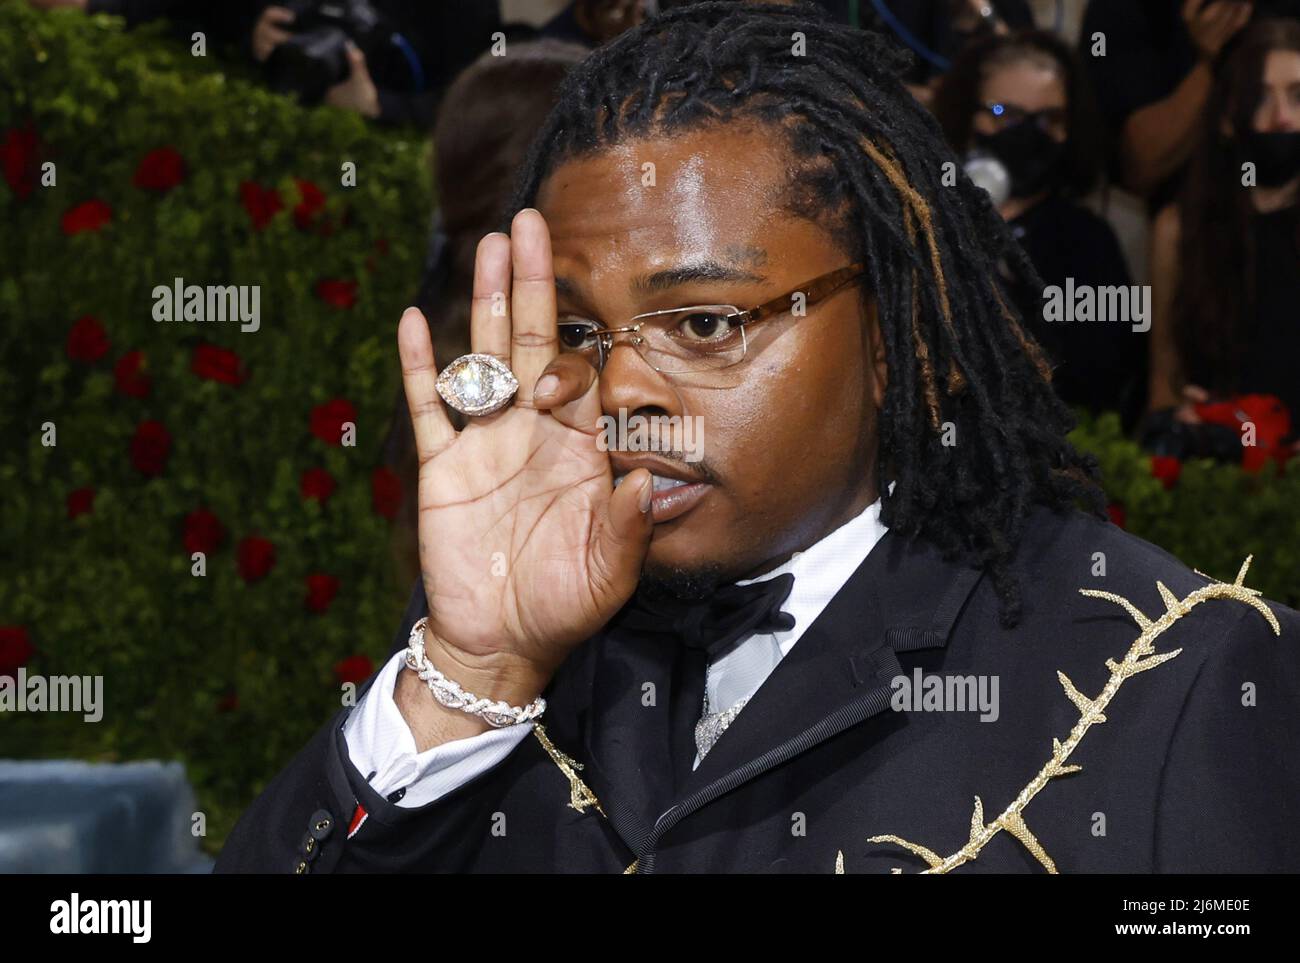 New York, United States. 03rd May, 2022. Gunna arrives on the red carpet for The Met Gala at The Metropolitan Museum of Art celebrating the Costume Institute opening of 'In America: An Anthology of Fashion' in New York City on Monday, May 2, 2022. Photo by John Angelillo/UPI Credit: UPI/Alamy Live News Stock Photo